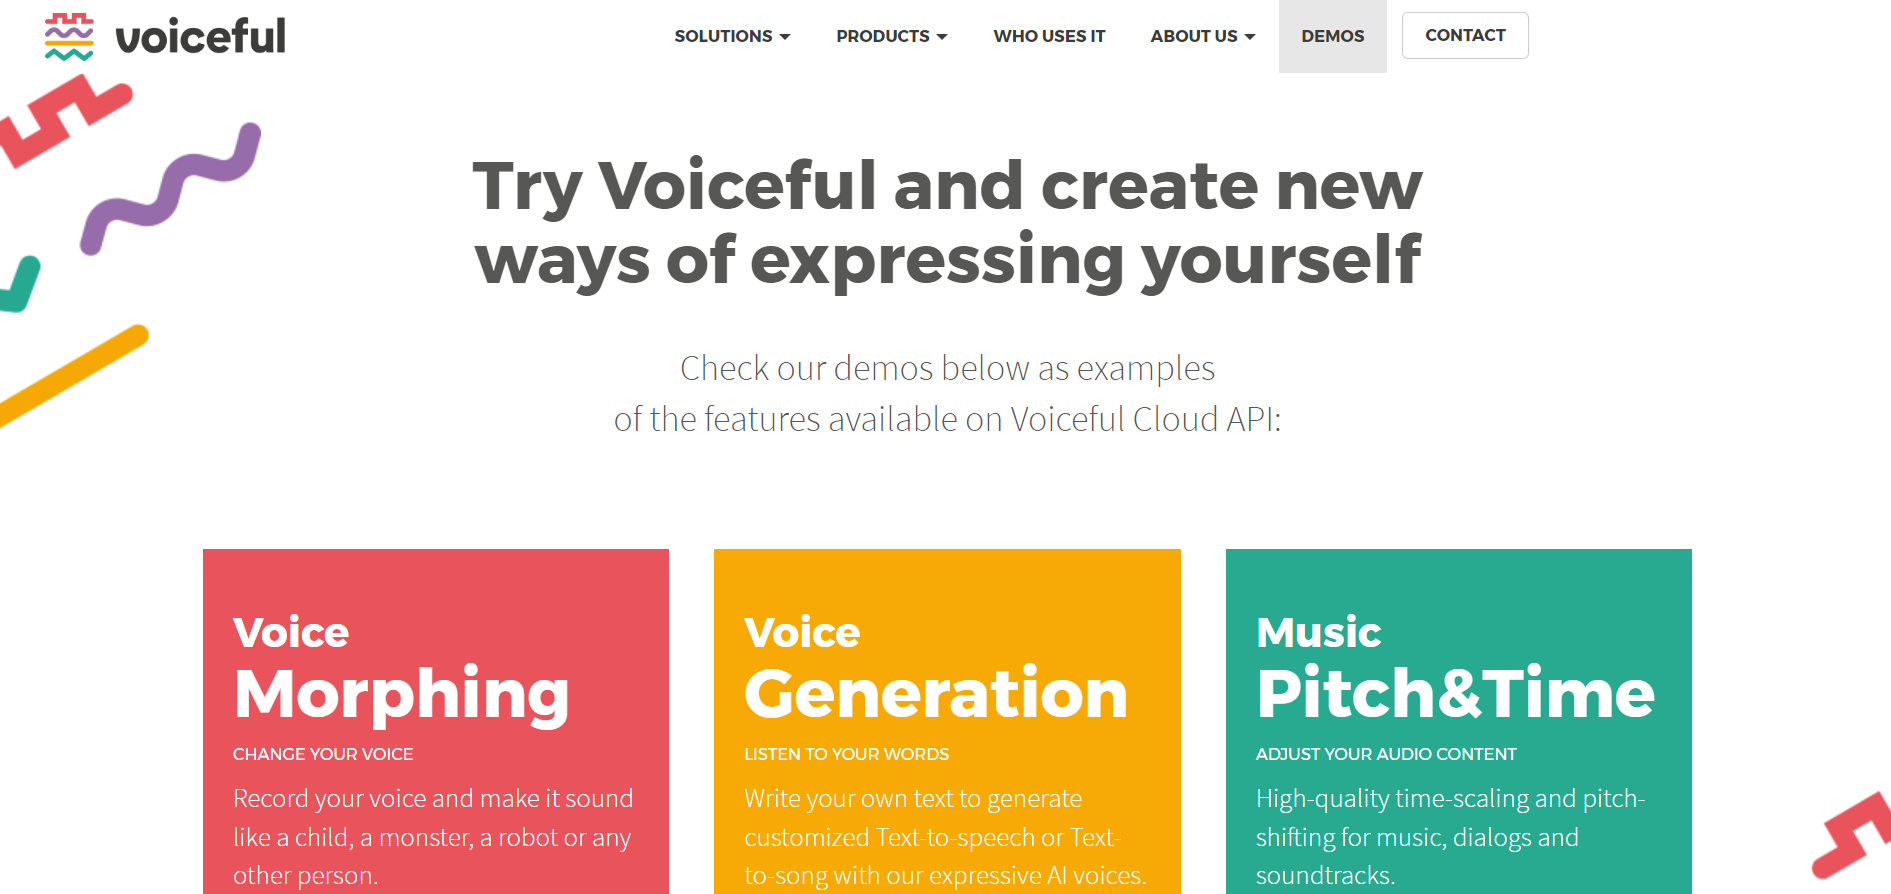 Create Unreal AI Speech and Singing with Voiceful.io’s Advanced Machine Learning Technology!